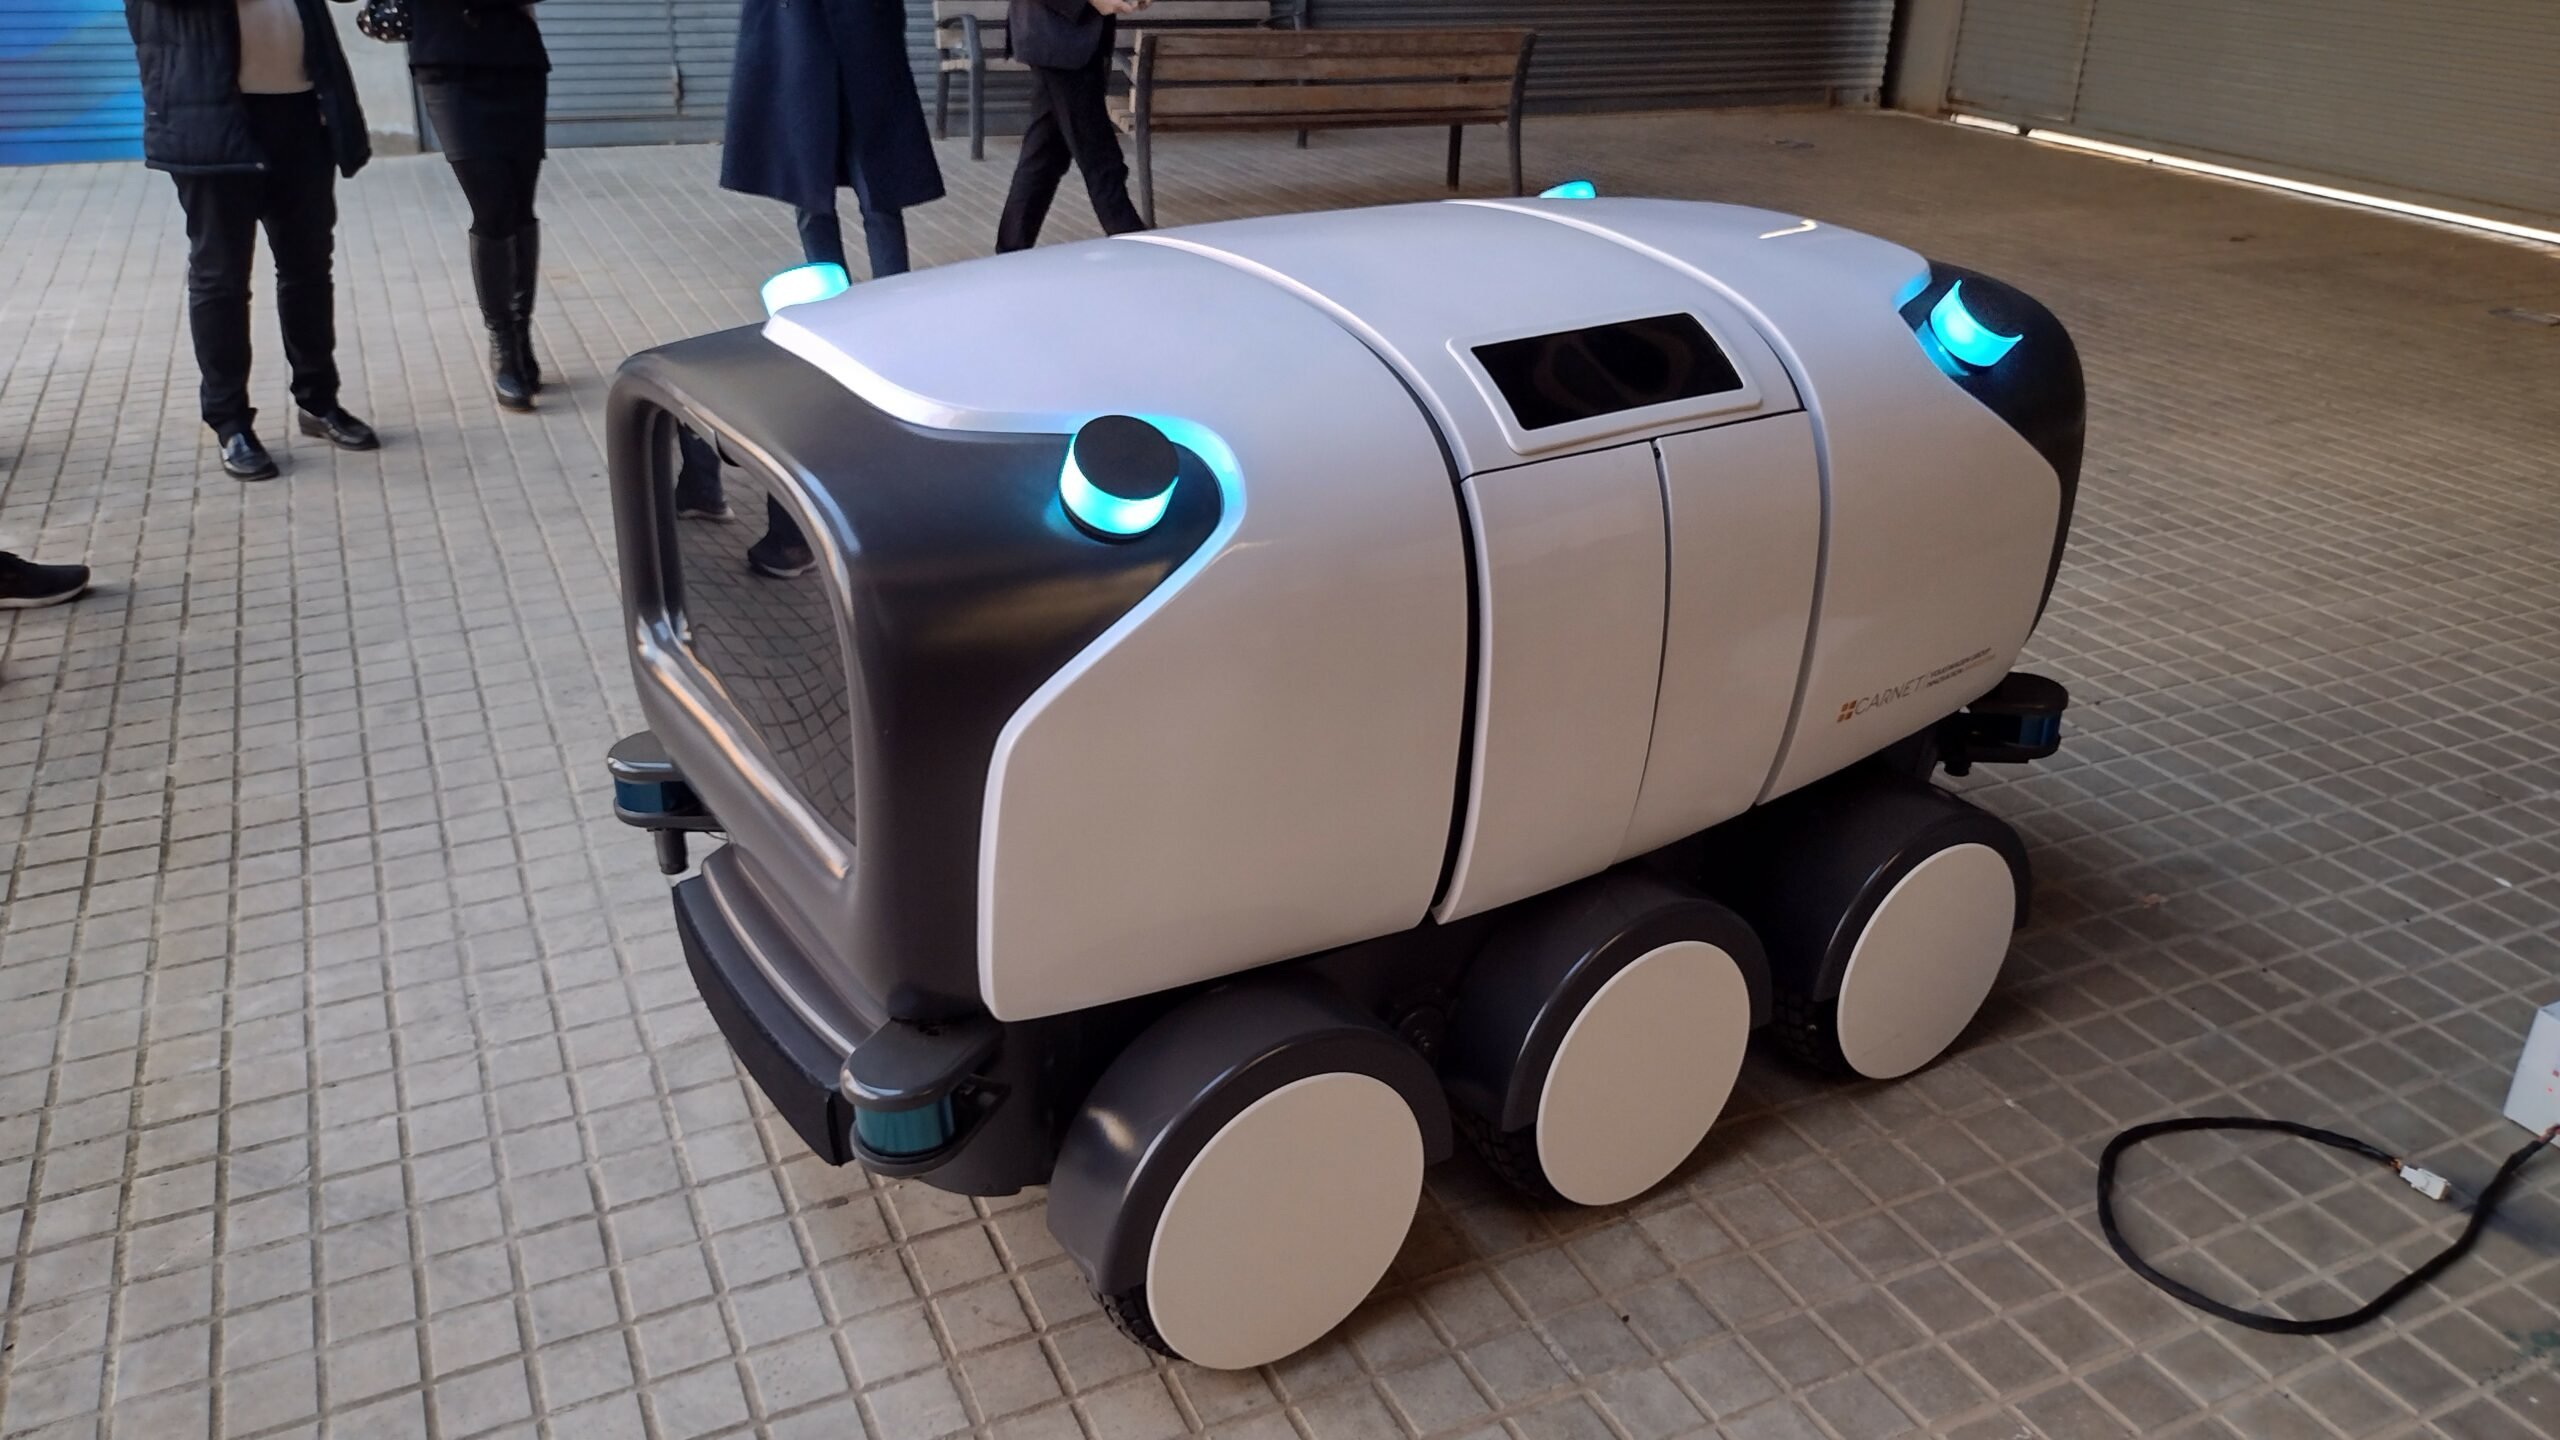 Barcelona tests the delivery driver of tomorrow